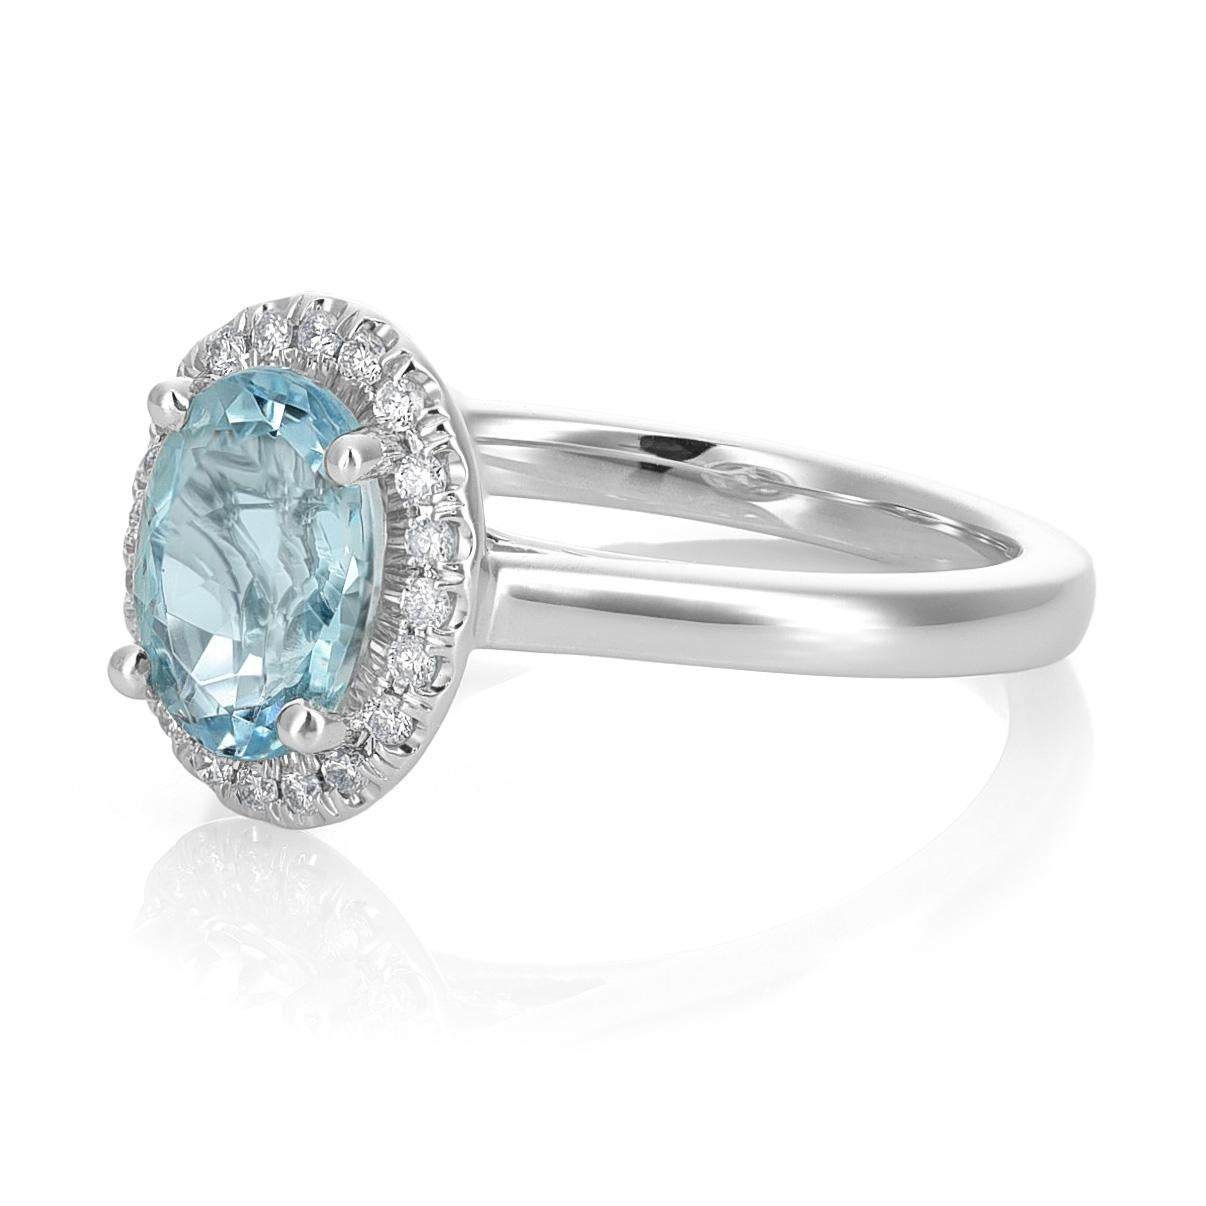 Introducing a 14K White Gold Ring adorned with a captivating Natural Aquamarine weighing 1.05 carats. This oval-shaped gem, delicately heated to enhance its natural beauty, takes center stage in this exquisite piece. The graceful design is